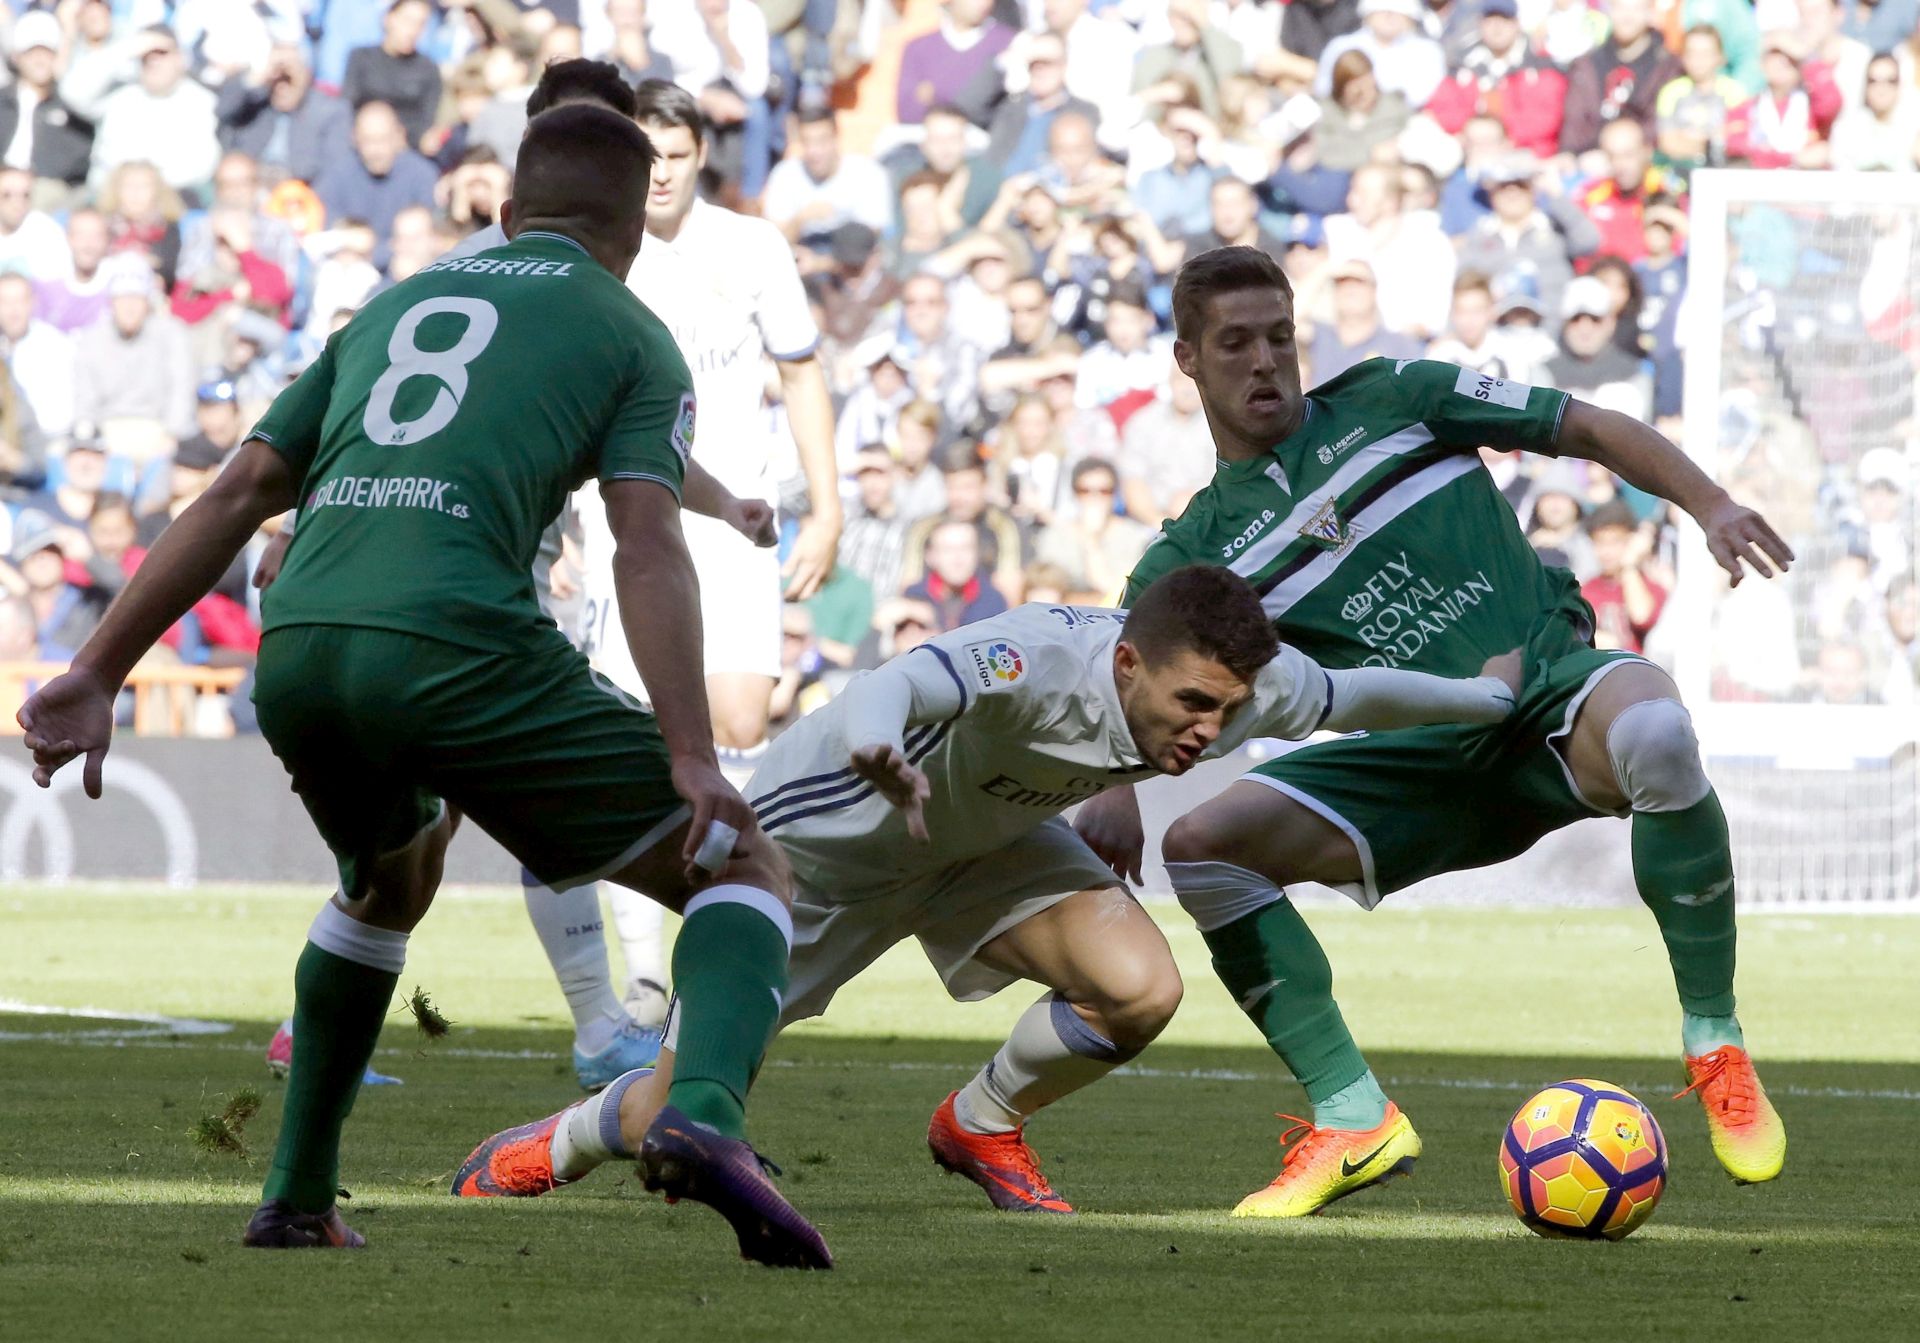 epa05619687 Real Madrid's Croatian midfielder Mateo Kovacic (C) vies for the ball with Leganes' Brazilian midfielder Gabriel Appelt Pires (L) and midfielder Rubén Pérez during the Primera Division Liga match between Real Madrid and Leganes held at the Santiago Bernabeu Stadium in Madrid, Spain, 06 November 2016.  EPA/KIKO HUESCA